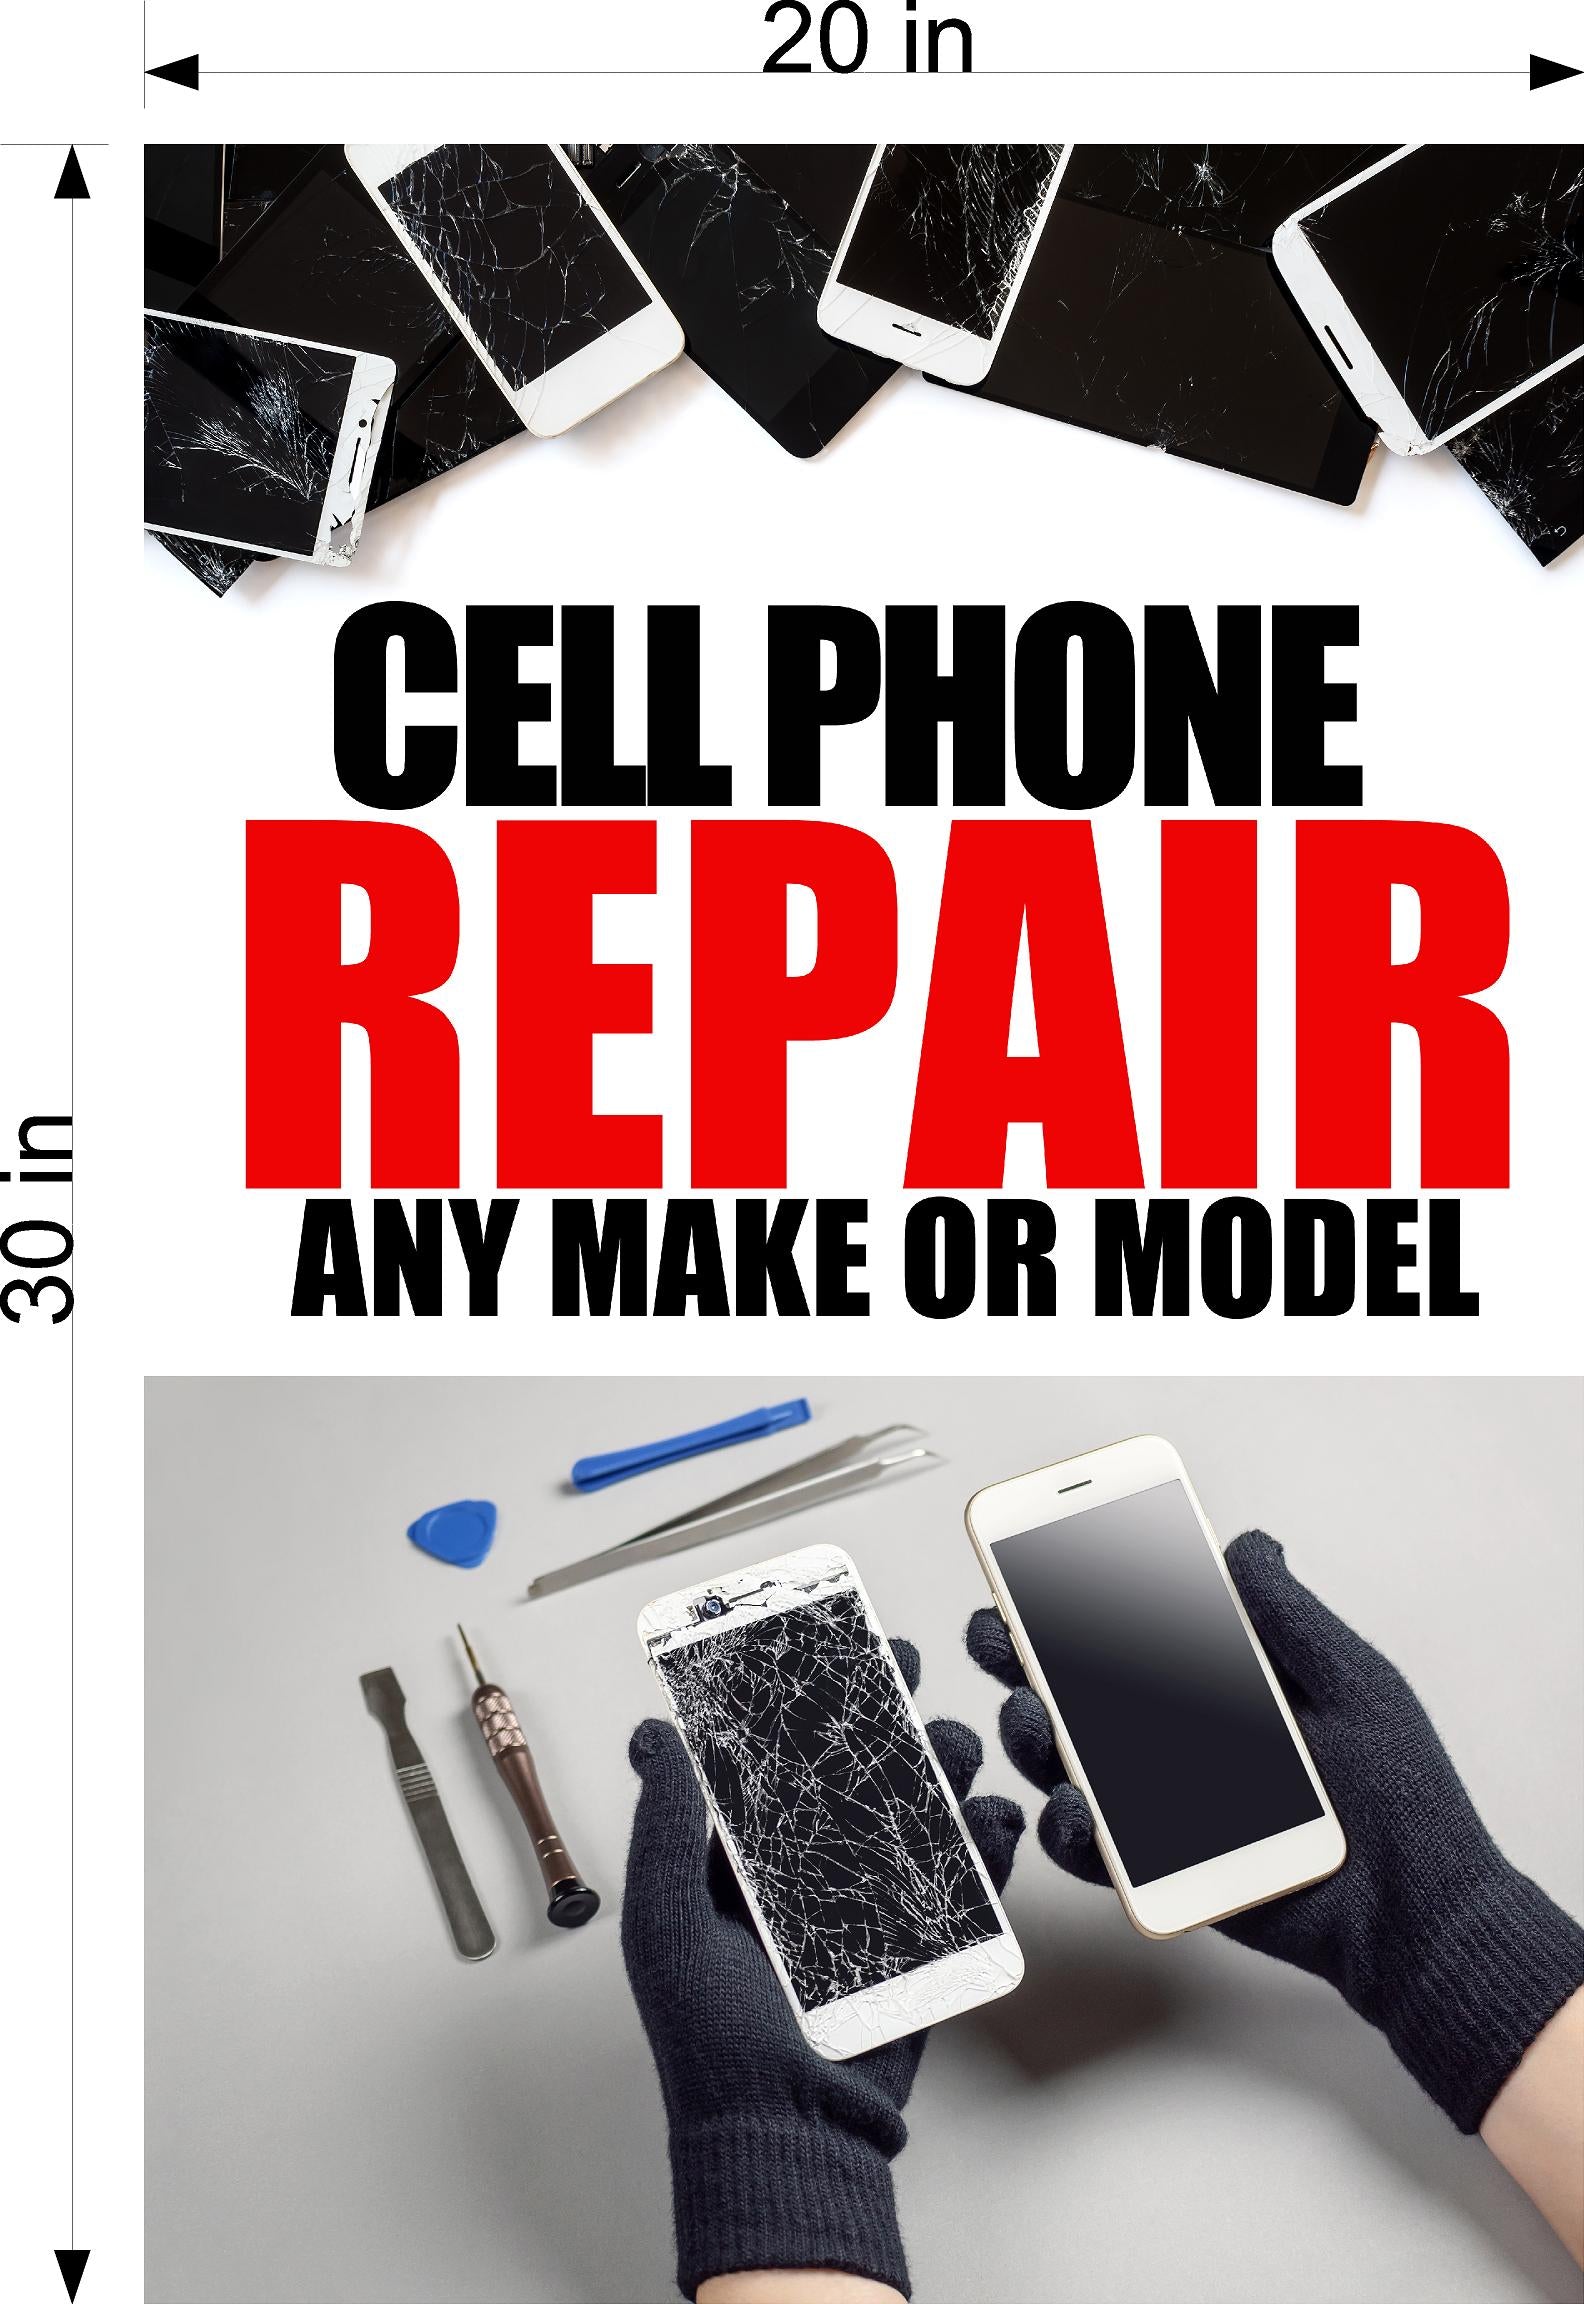 Phone Repair 03 Photo-Realistic Paper Poster Premium Interior Inside Sign Fix Smartphone buy Cell Wall Window Non-Laminated Vertical